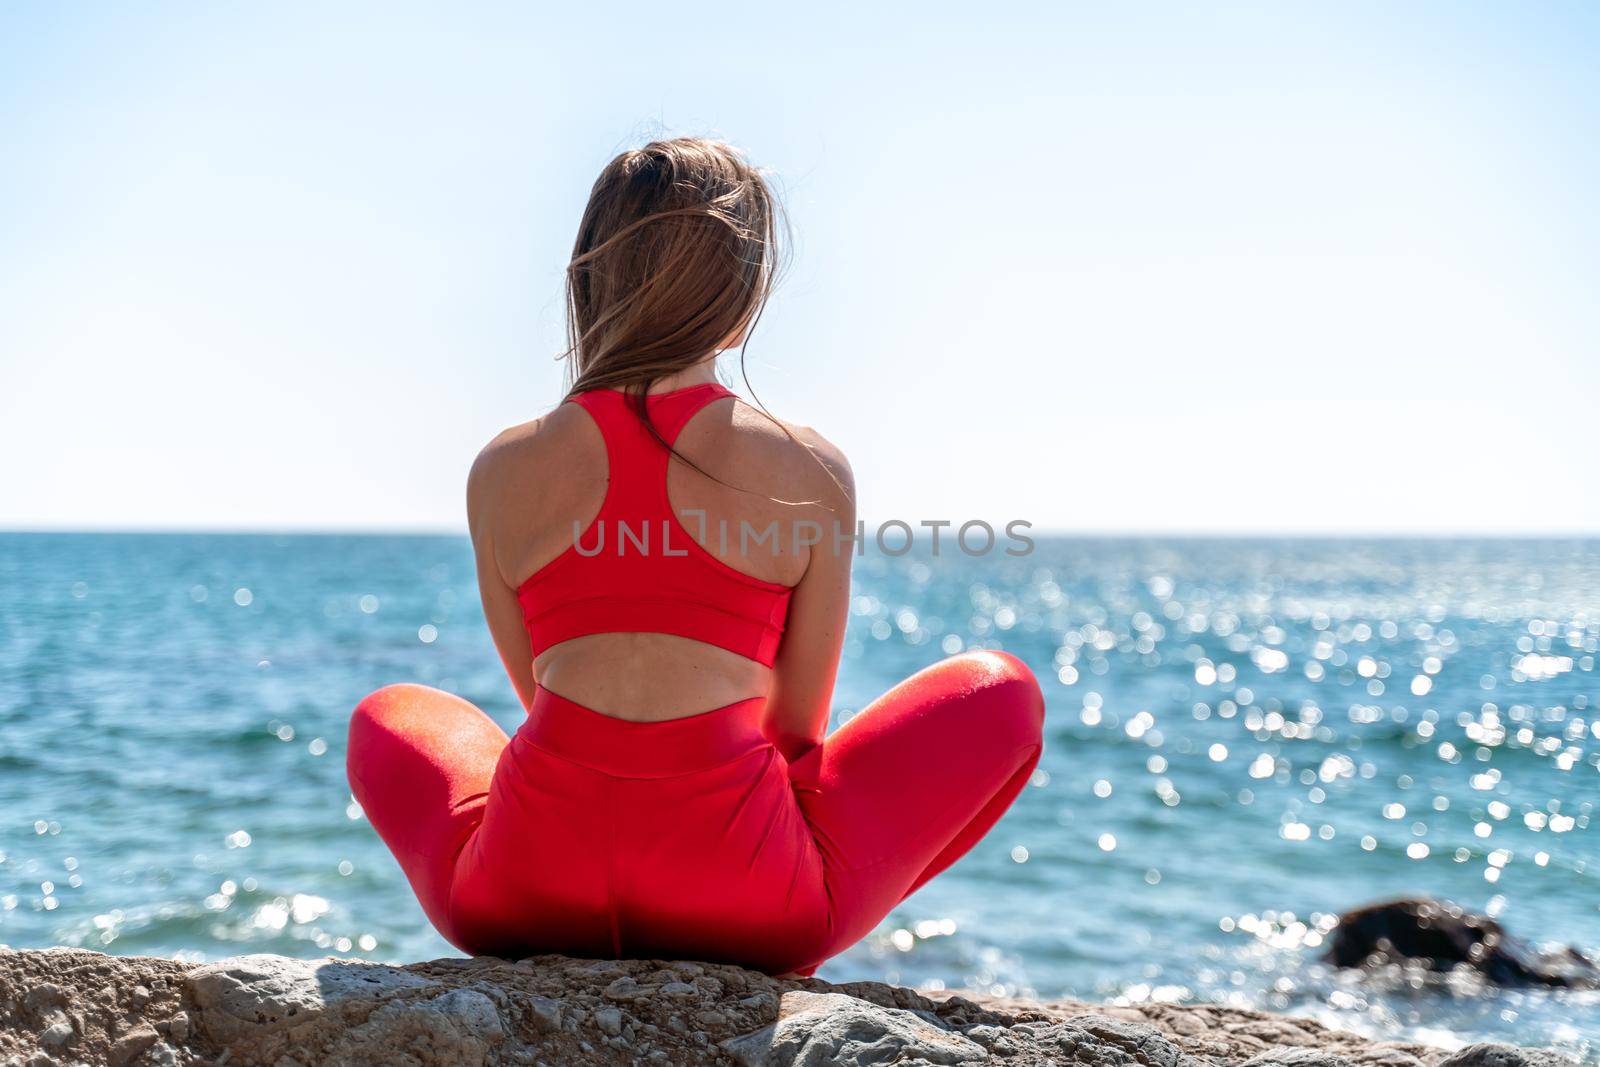 A young woman in red leggings and a red top with long loose hair practices yoga outdoors by the sea on a sunny day. Women's yoga, fitness, Pilates. The concept of a healthy lifestyle, harmony